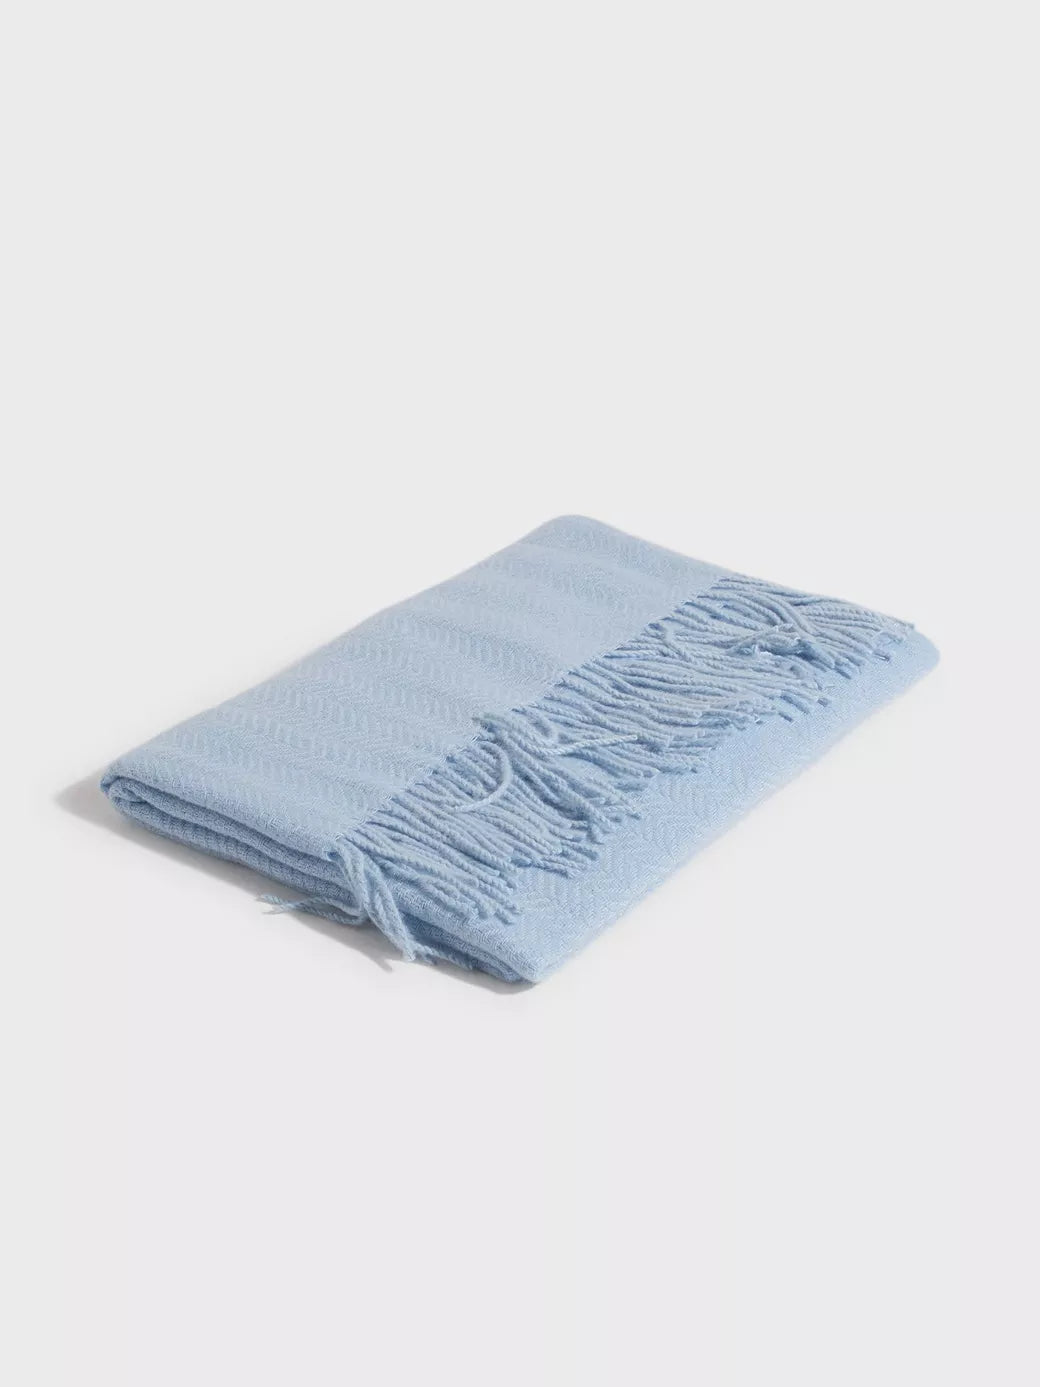 Pckial New long Scarf - Silver Mink or Kentucky Blue